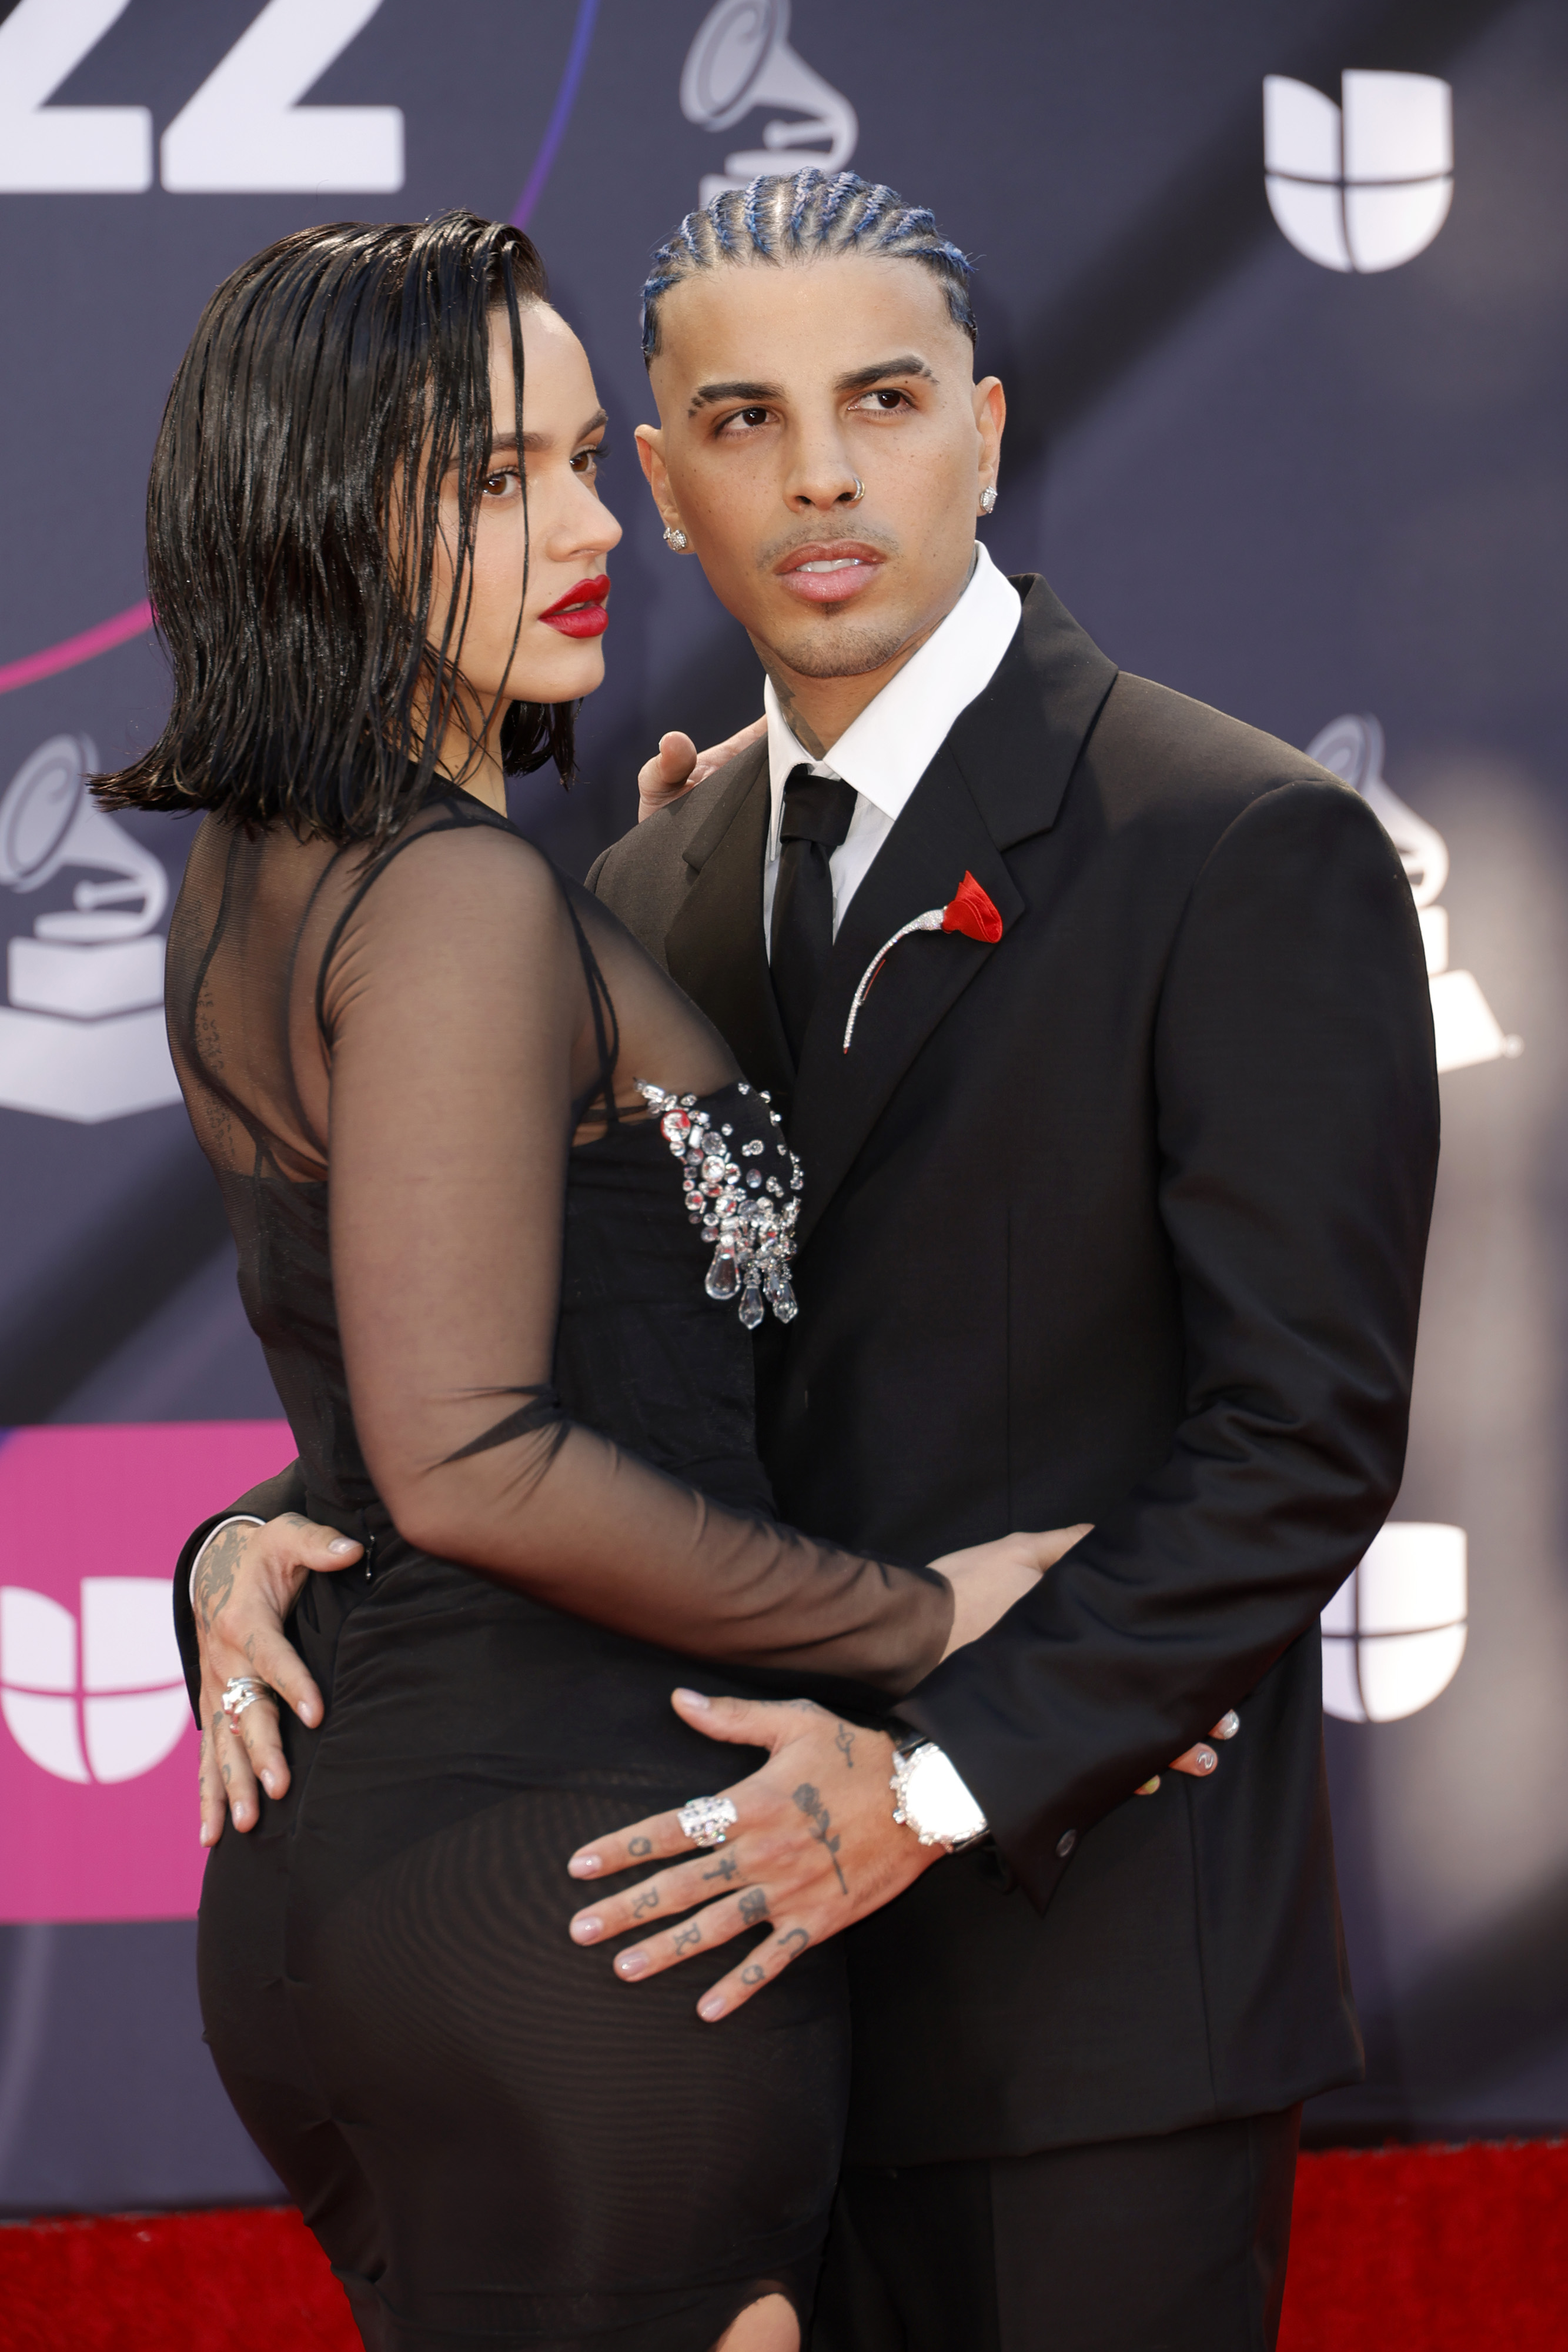 Rosalia and Rauw Alejandro at the 23rd Annual Latin GRAMMY Awards on November 17, 2022, in Las Vegas, Nevada. | Source: Getty Images